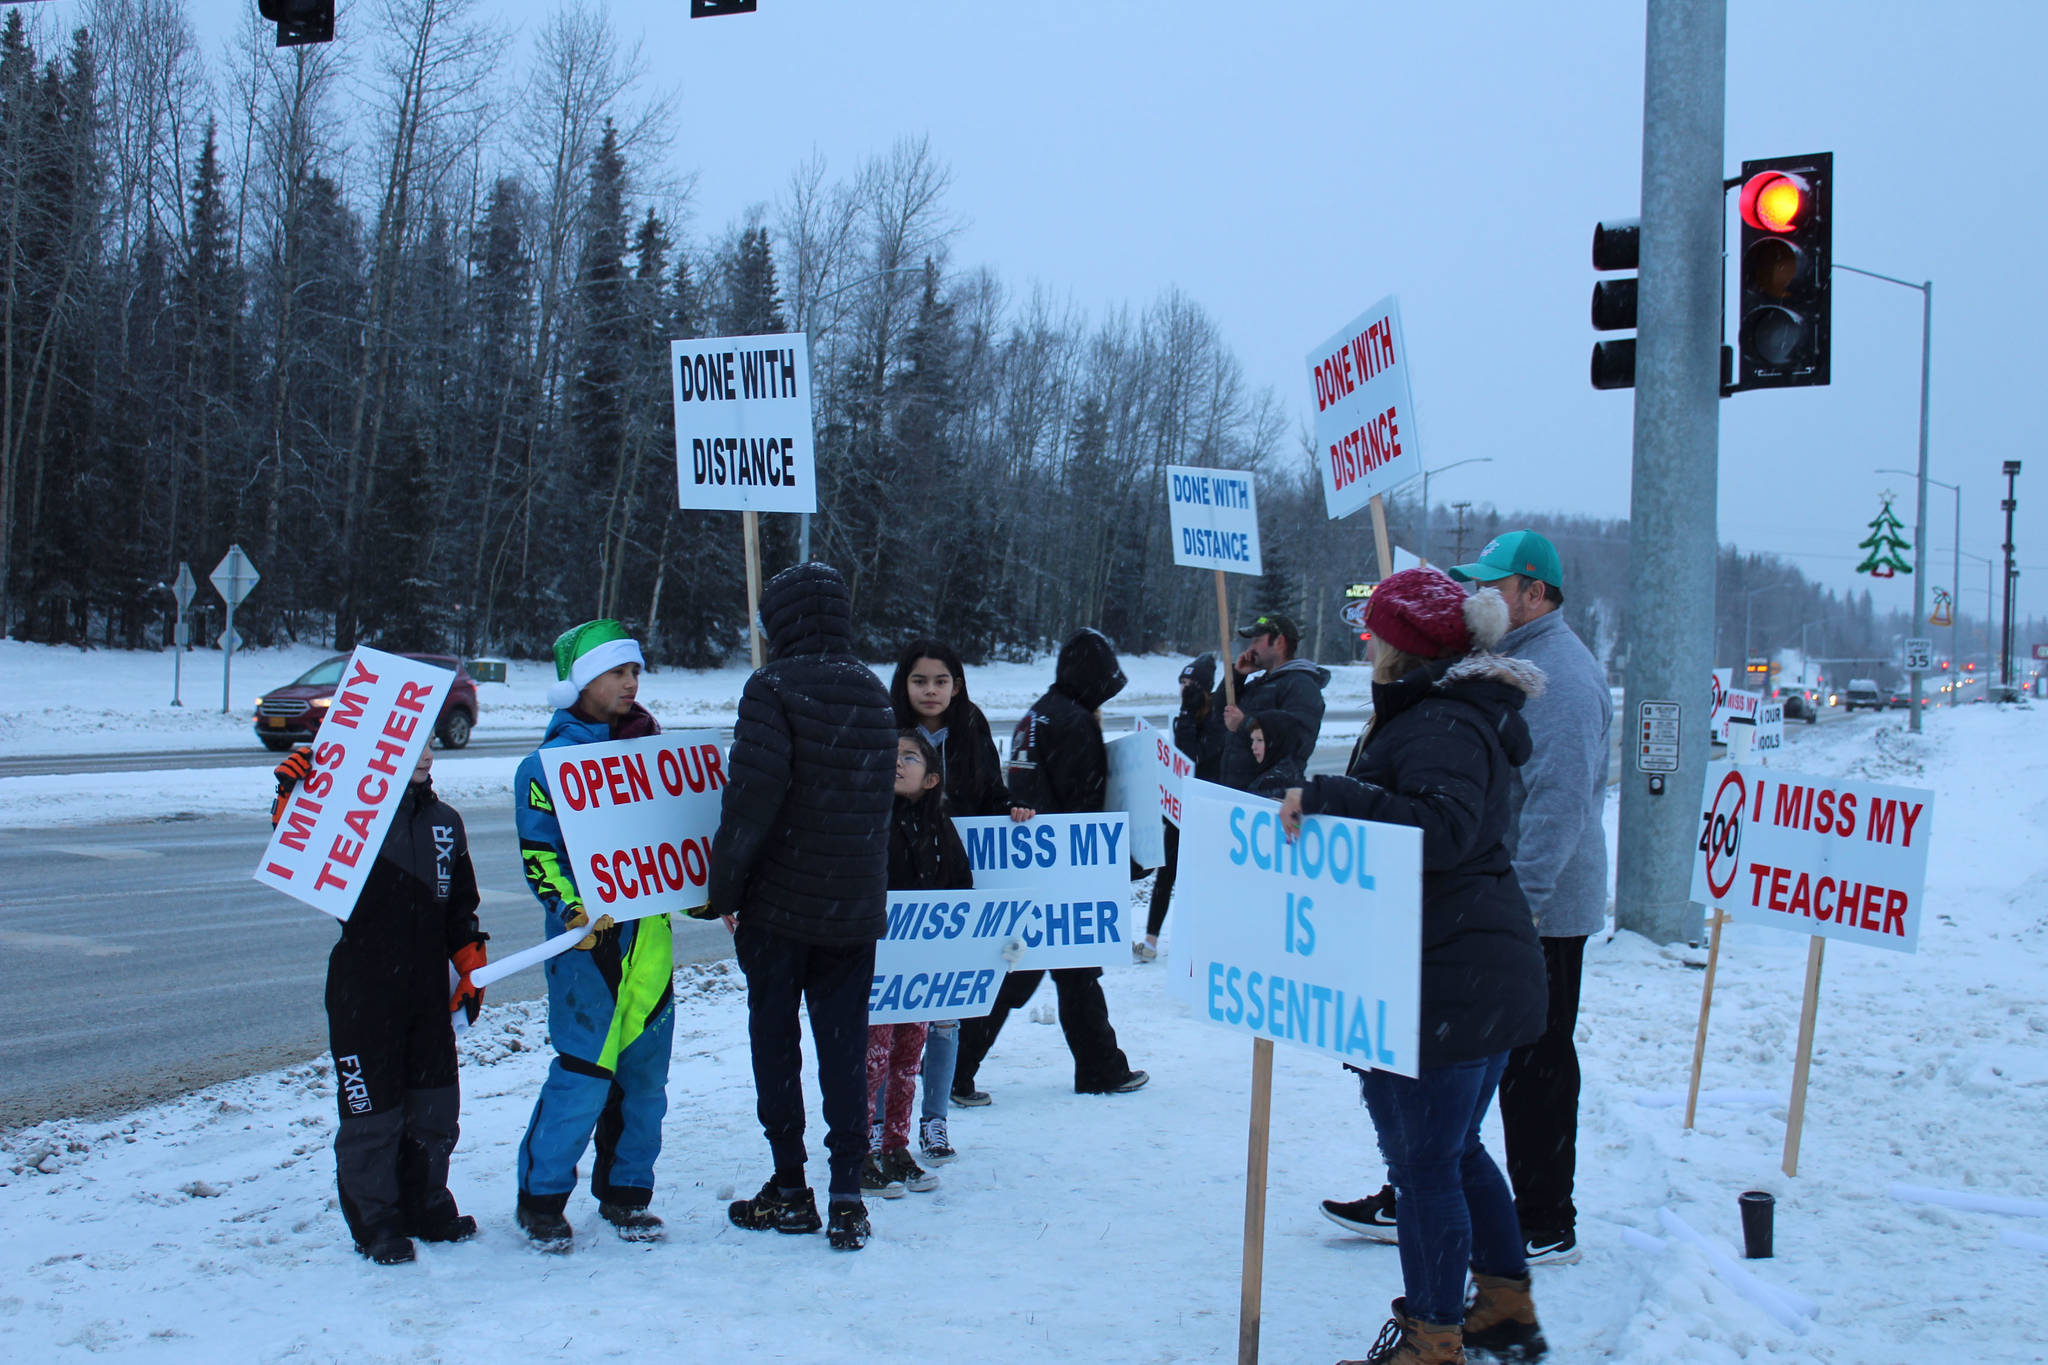 Protesters gather at the intersection of the Kenai Spur and Sterling highways on Tuesday, Dec. 15 in Soldotna, Alaska.